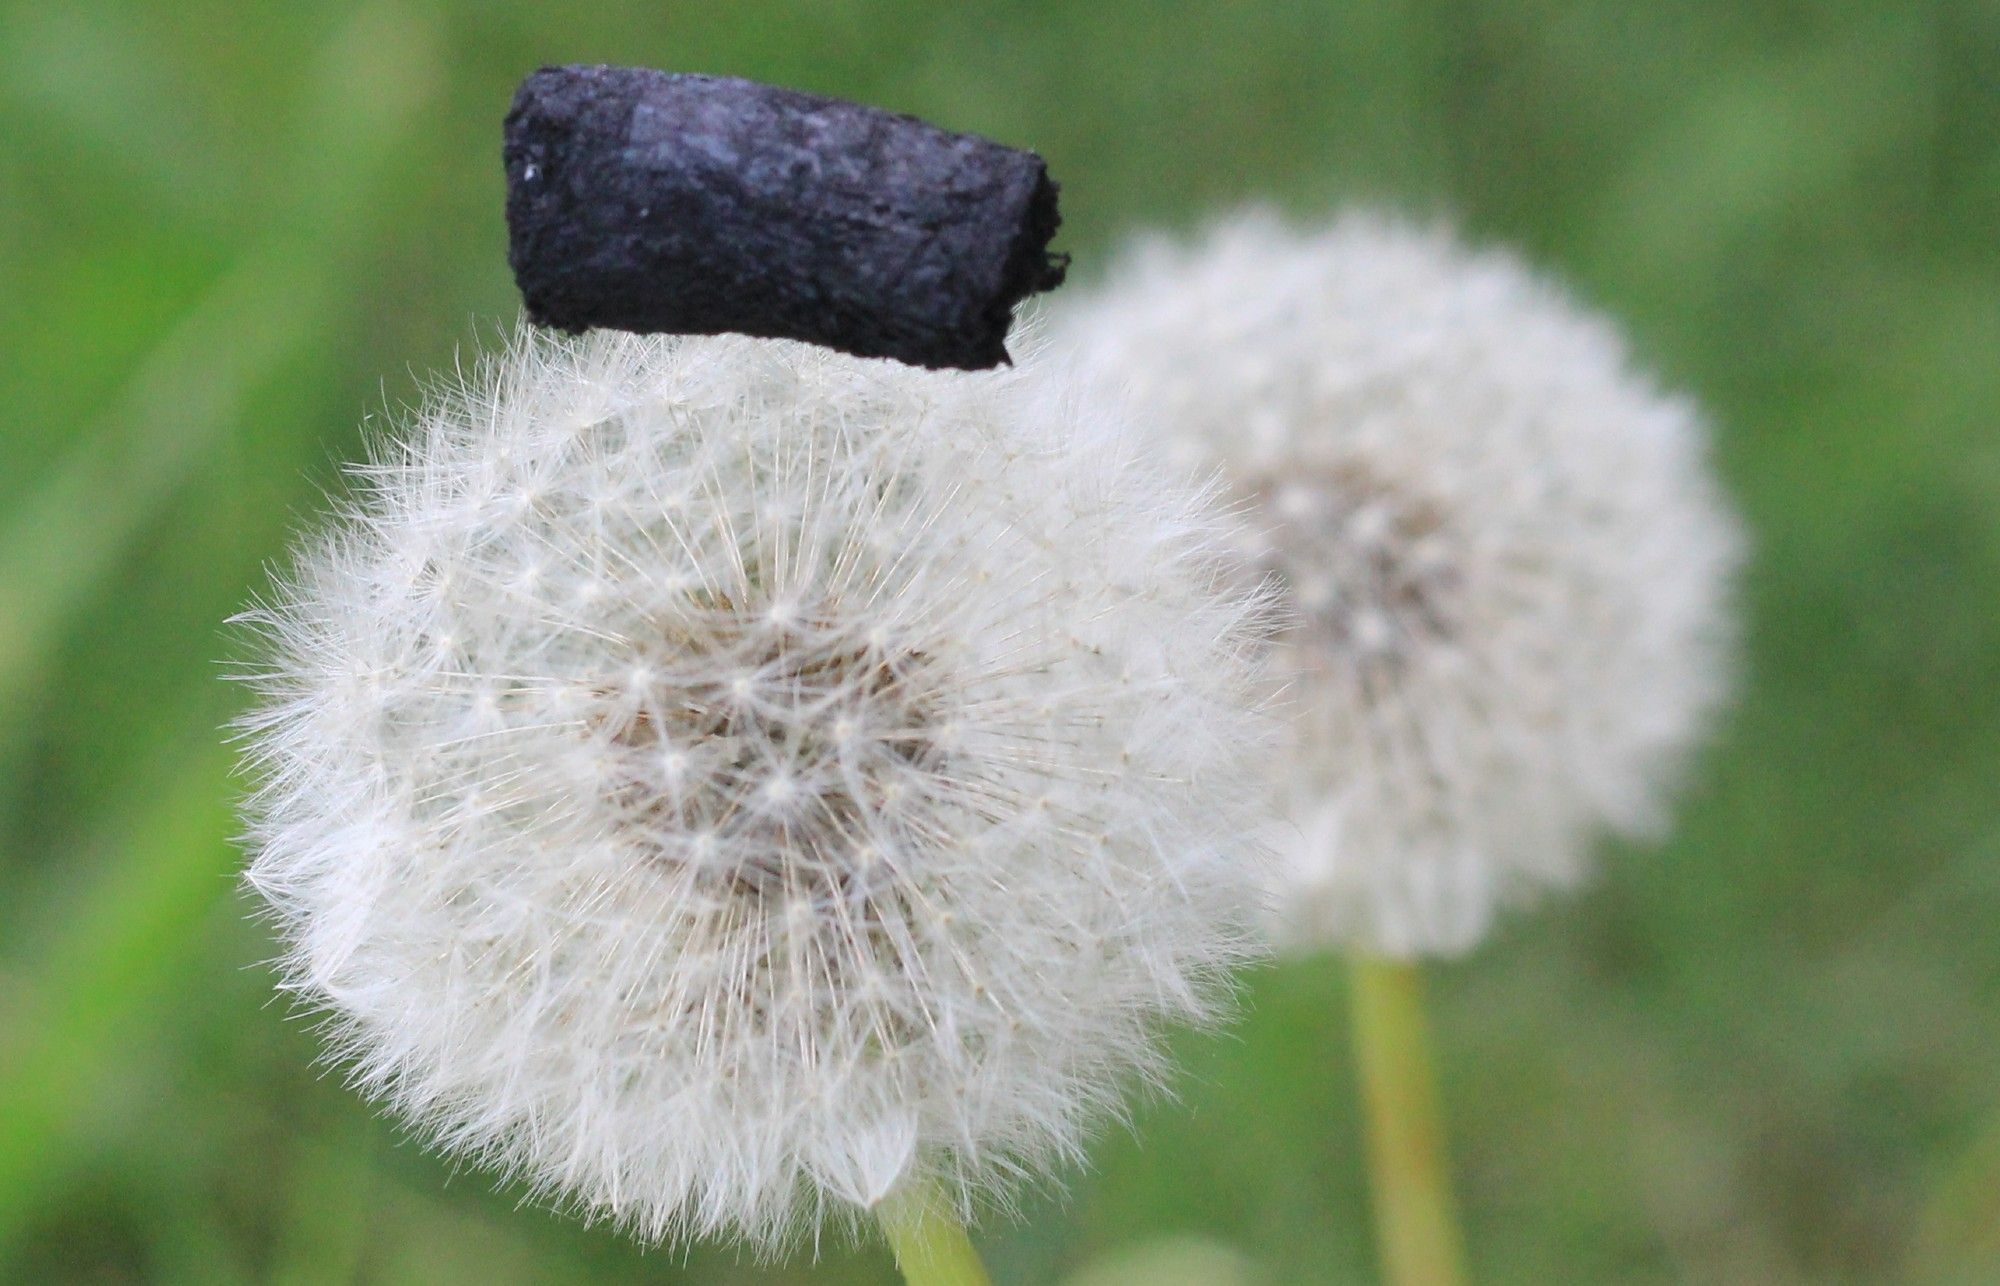 A newly invented black material sits lightly atop a dandelion flower.